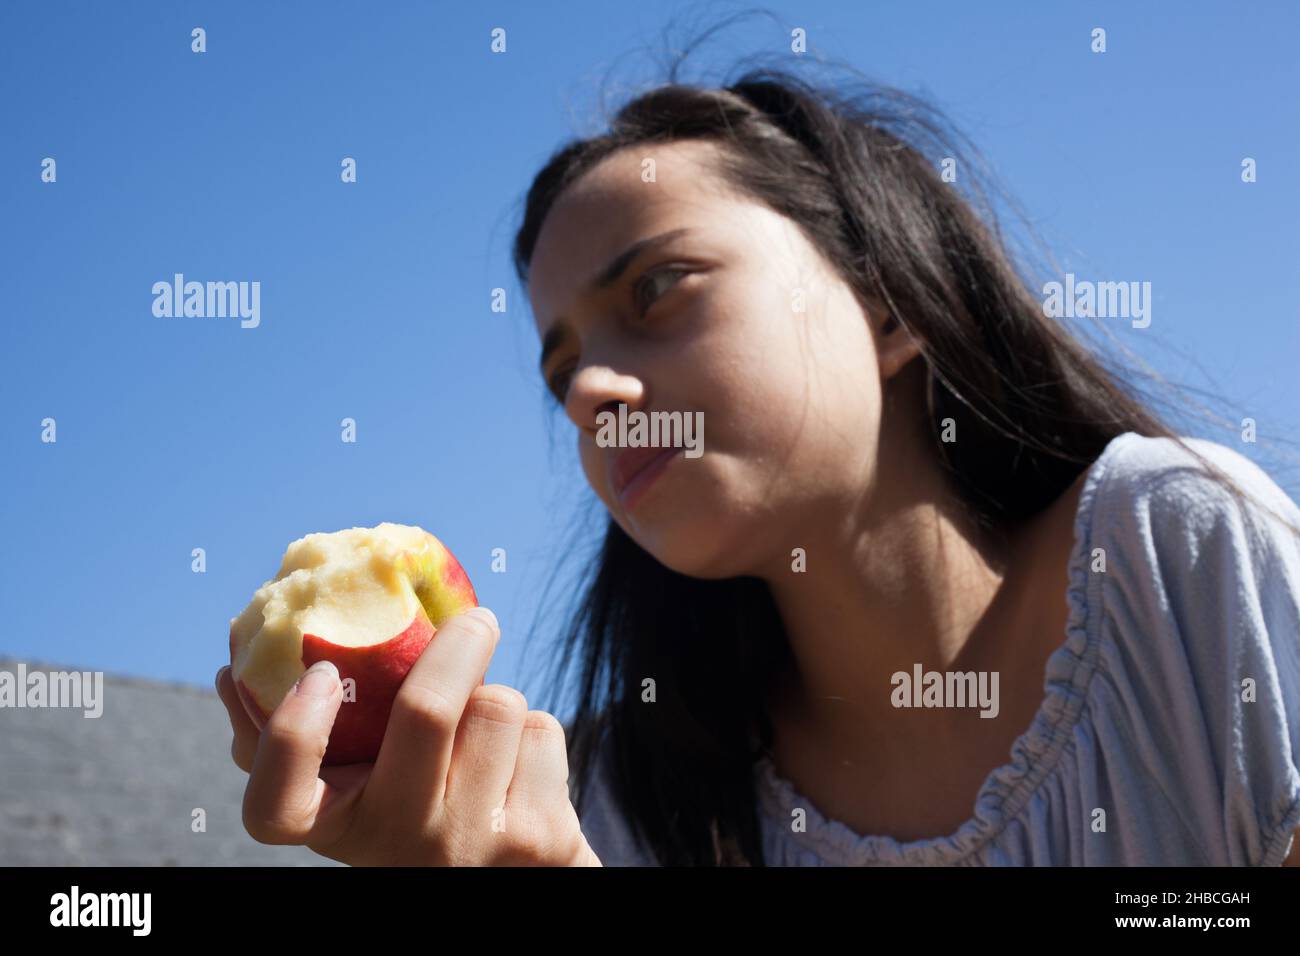 An 11 year old girl eating an apple Stock Photo